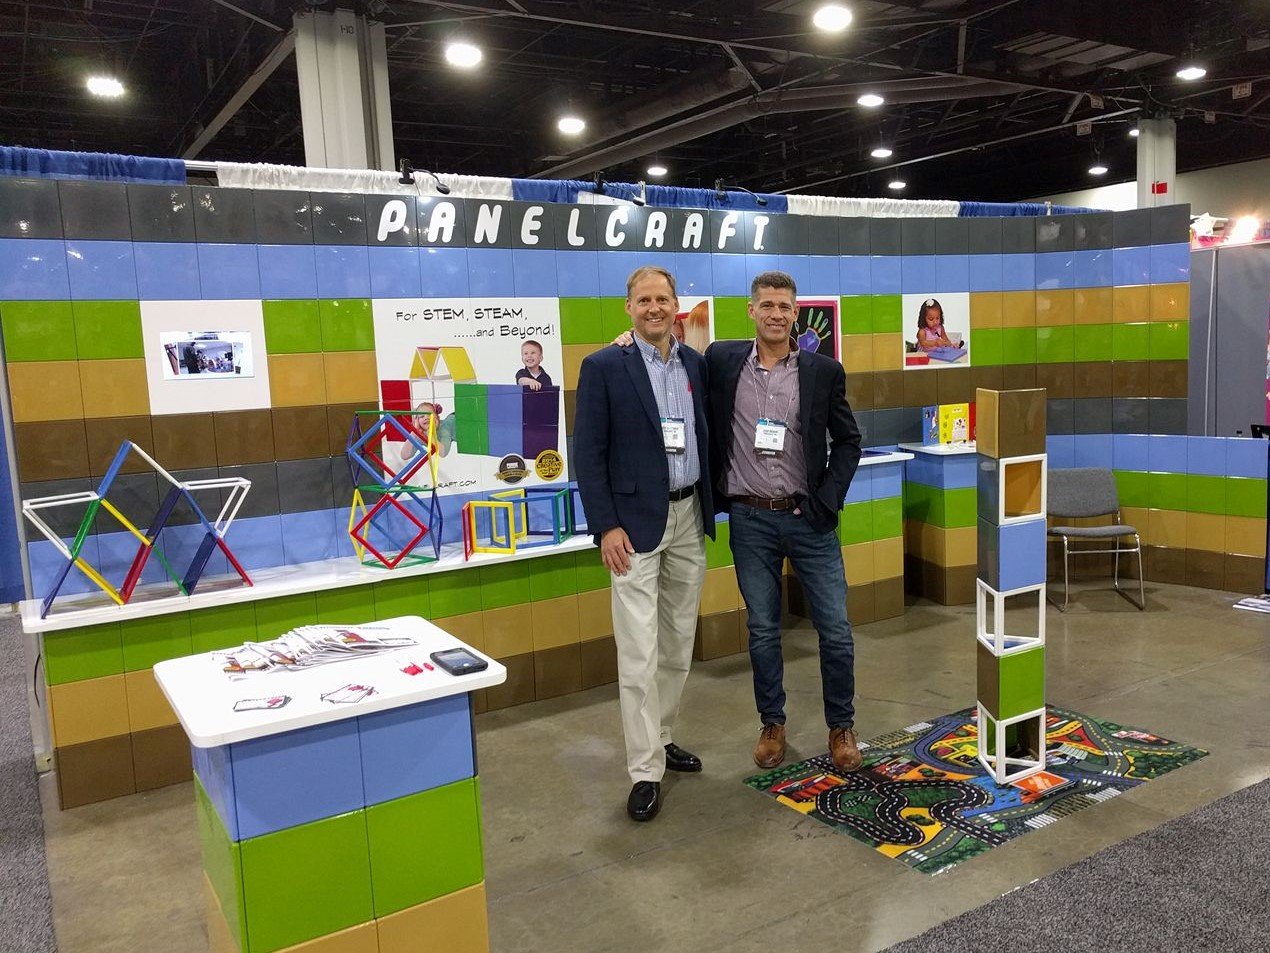 Panelcraft magnetic blocks exhibit for science and children's museum